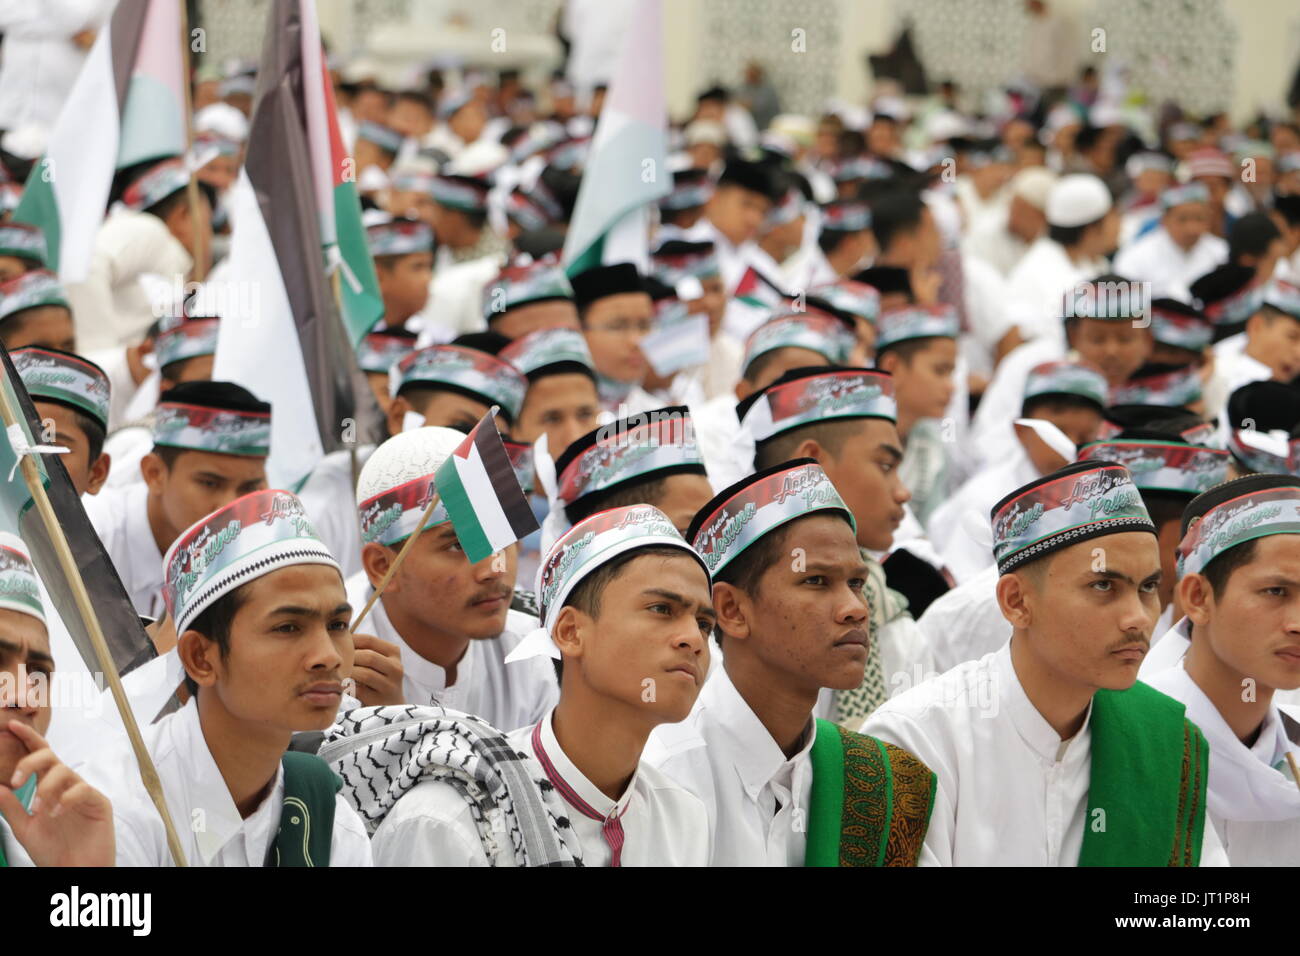 The people of Aceh from various elements are doing solidarity actions for Palestine. In the action centered at Baiturrahman Great Mosque, Banda Aceh City, the participants of the action perform various activities such as recitation, remembrance, prayer, donation, and parade. The people of Aceh from various elements are doing solidarity actions for Palestine. In the action centered at Baiturrahman Grand Mosque, Banda Aceh City, the participants of the action perform various activities such as recitation, remembrance, prayer, donation, and parade. (Photo by Abdul Hadi Firsawan/Pacific Press) Stock Photo